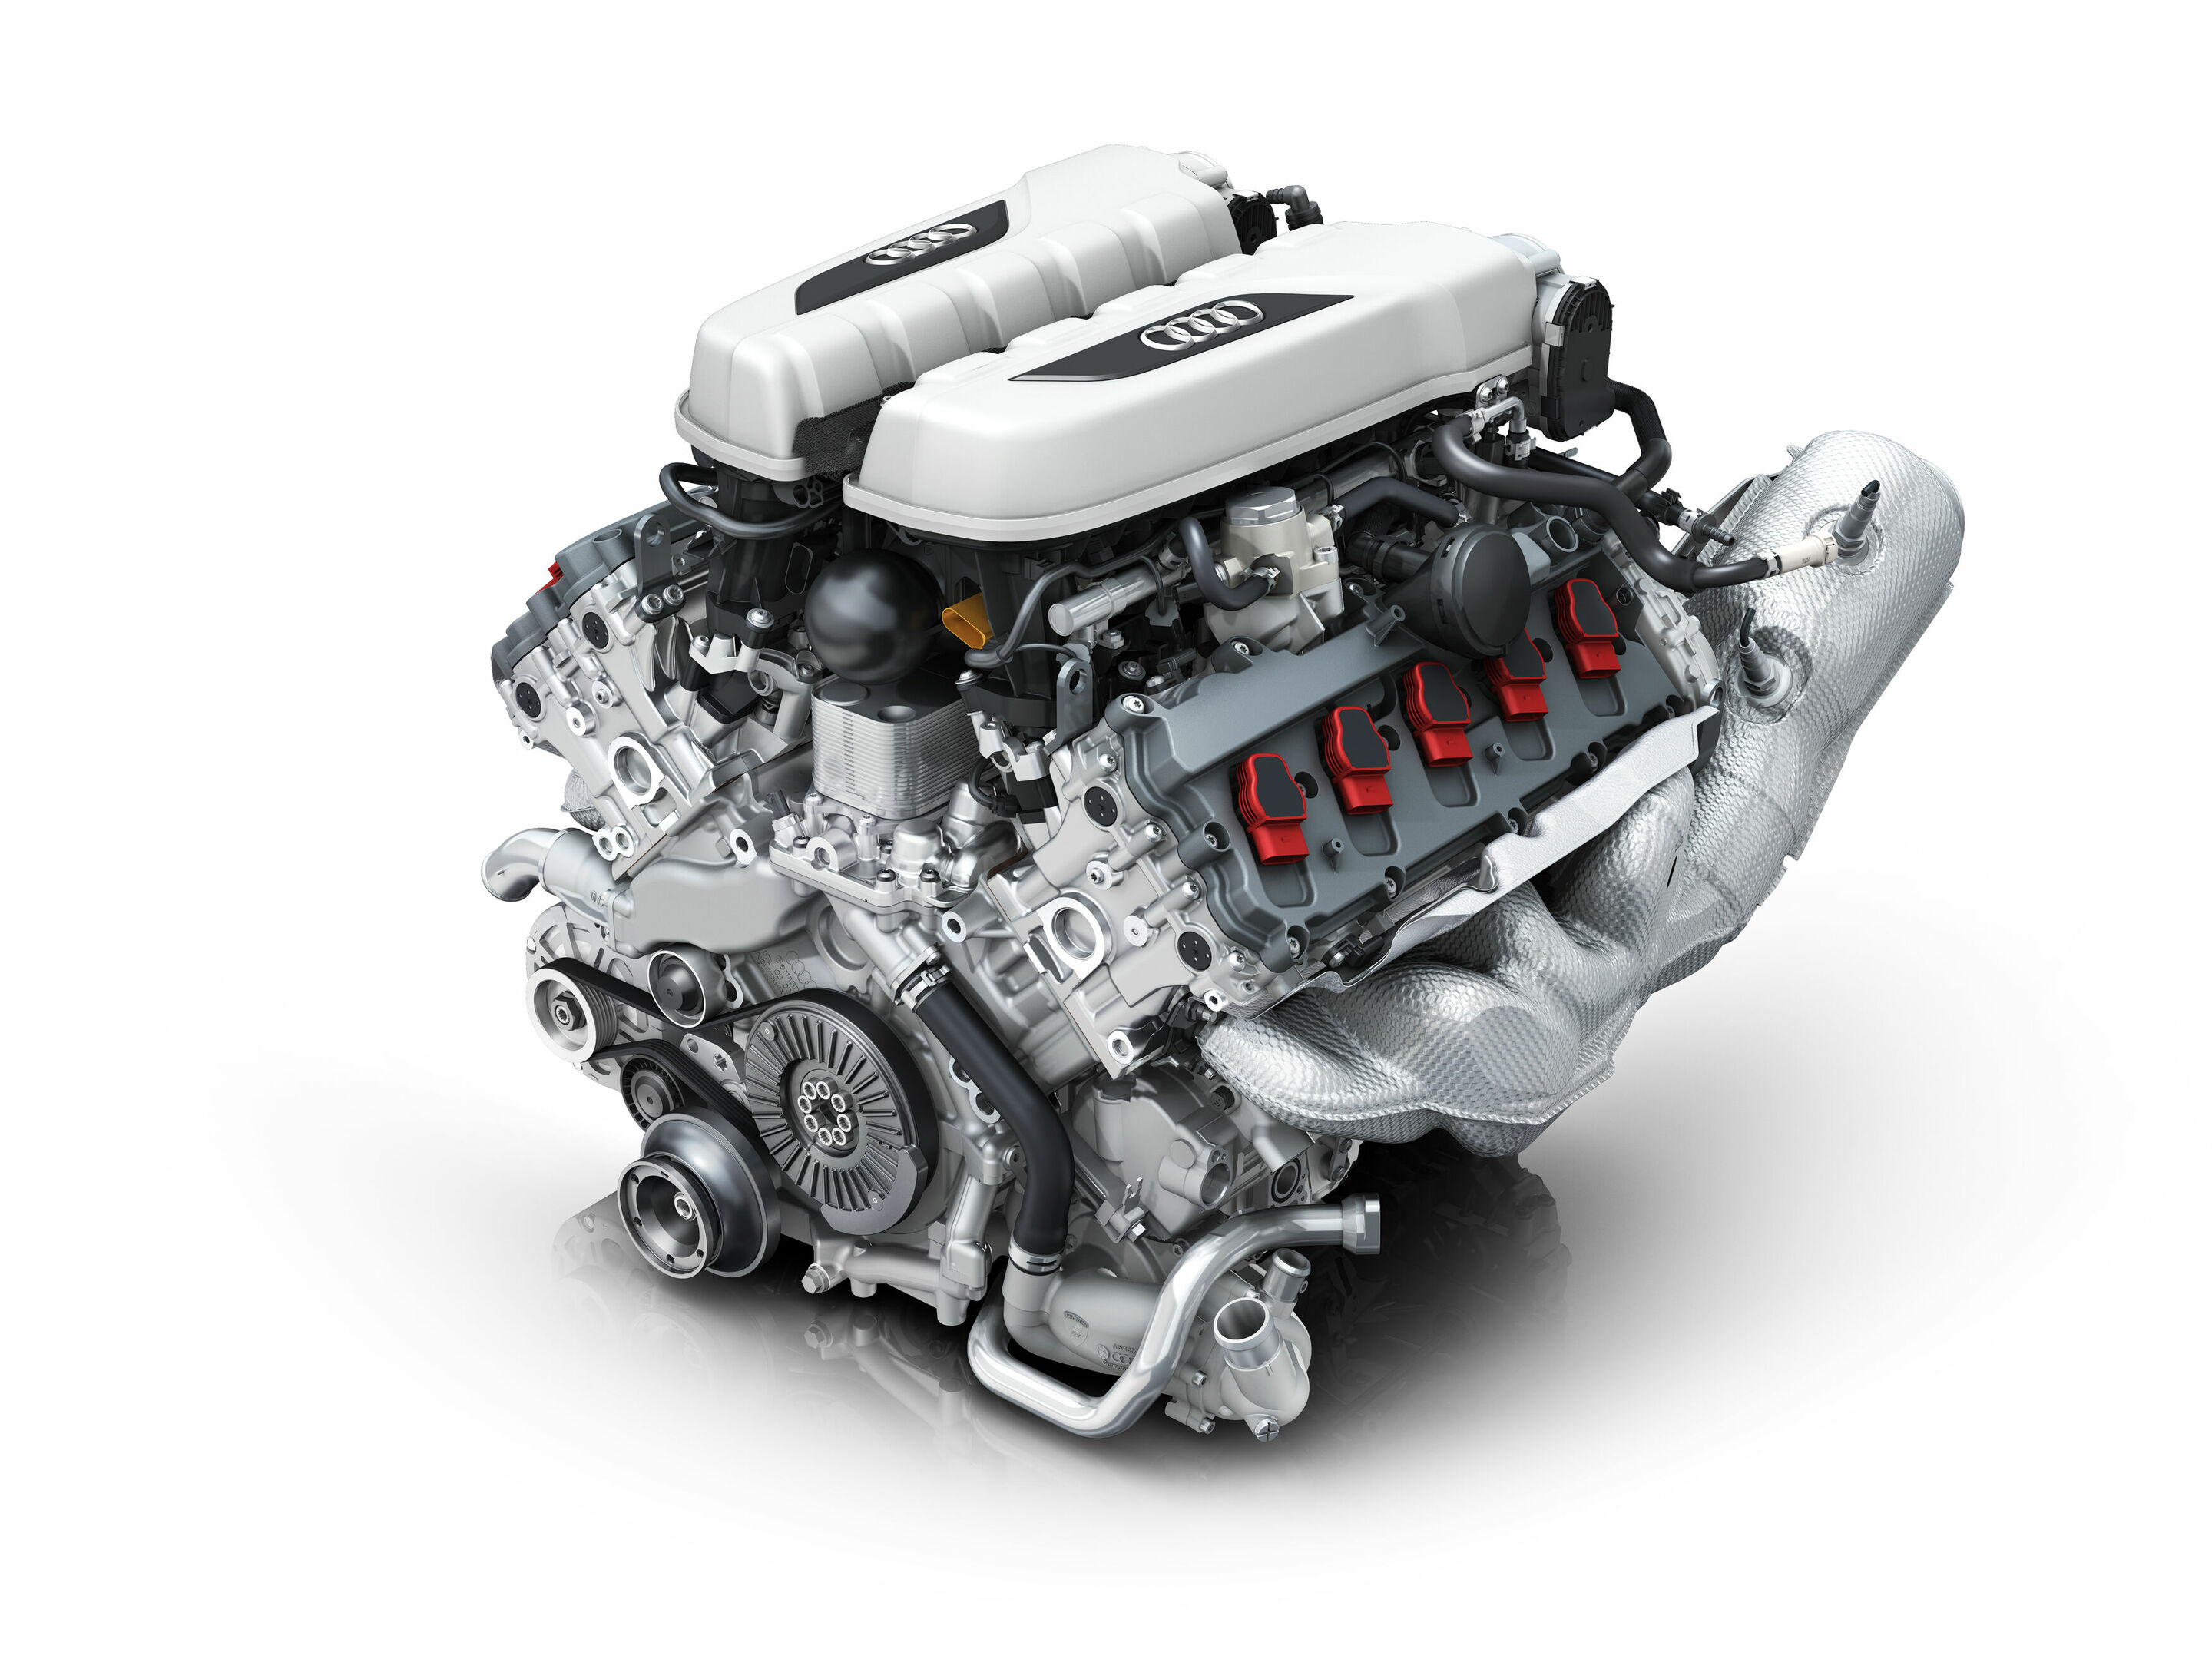 The heart of the Audi R8: the V10 naturally aspirated engine